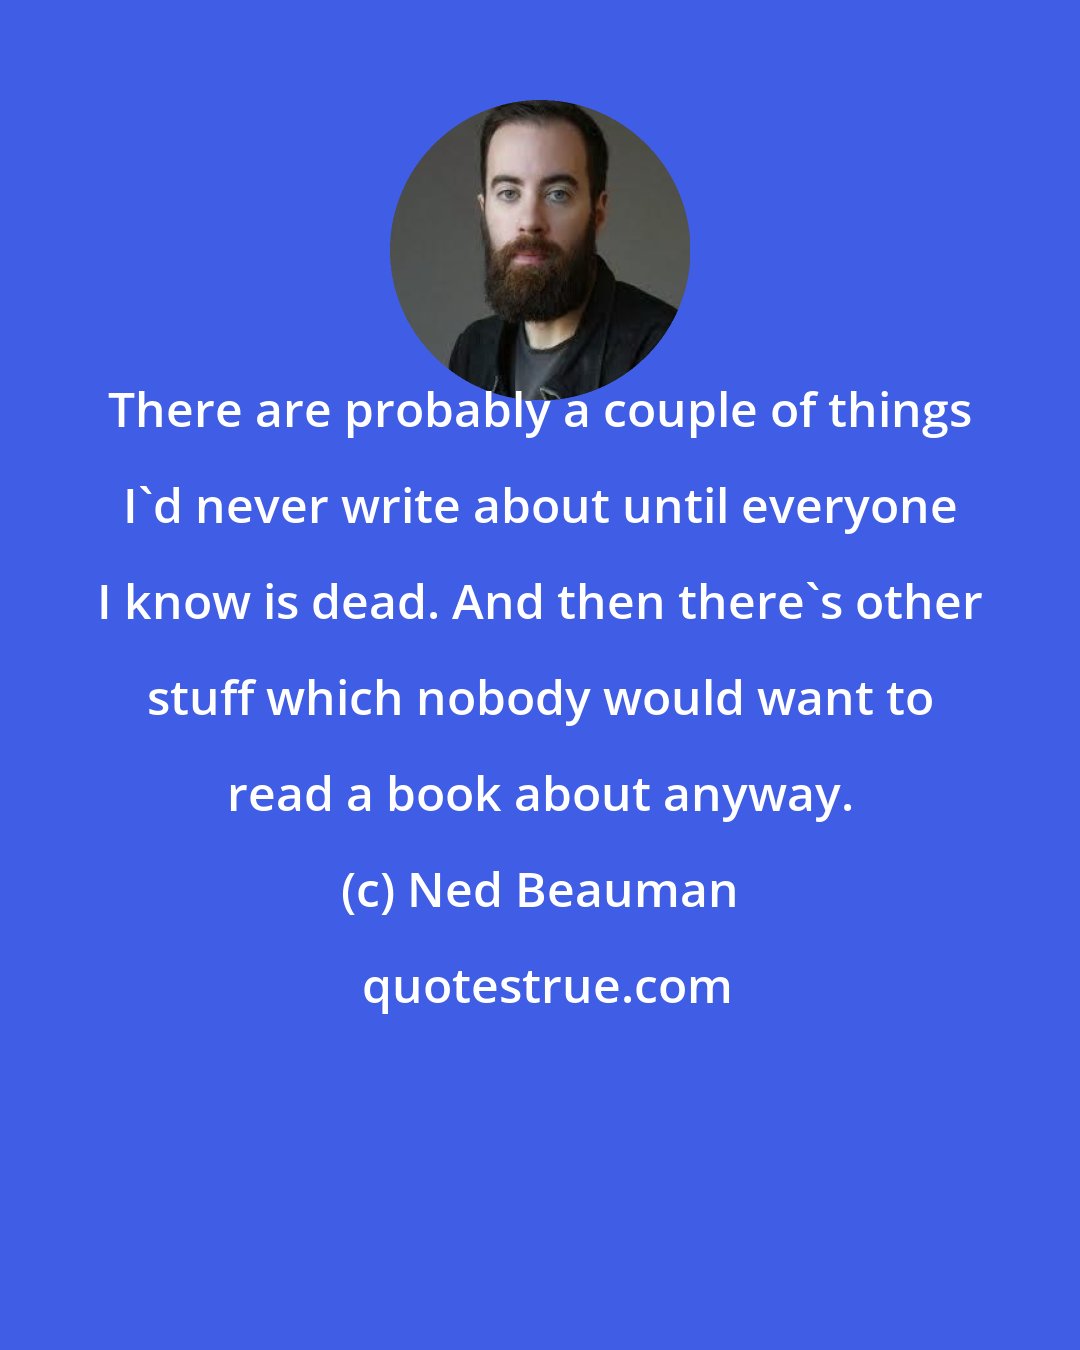 Ned Beauman: There are probably a couple of things I'd never write about until everyone I know is dead. And then there's other stuff which nobody would want to read a book about anyway.